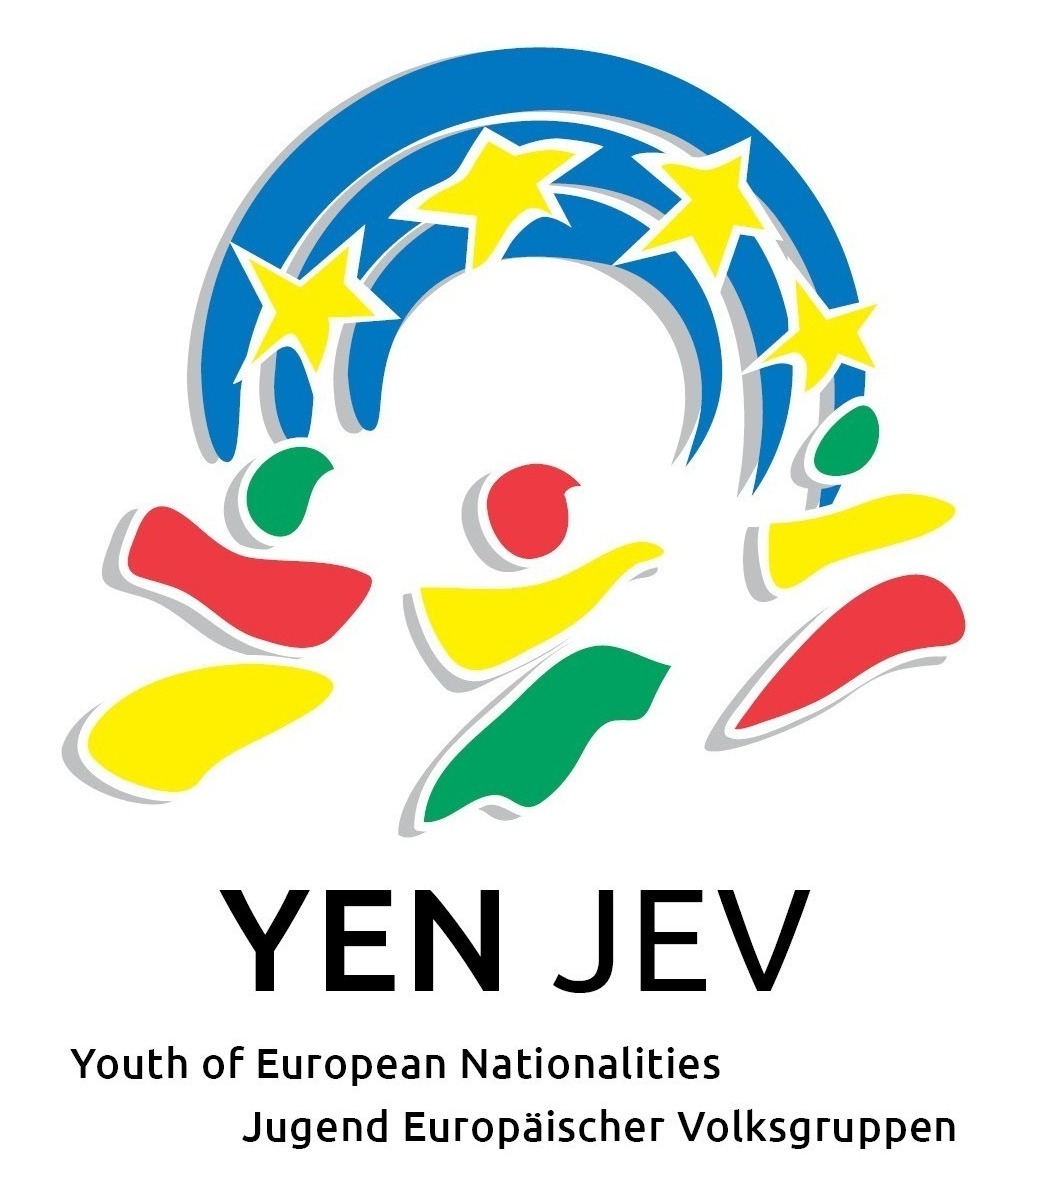 Youth of European Nationalities